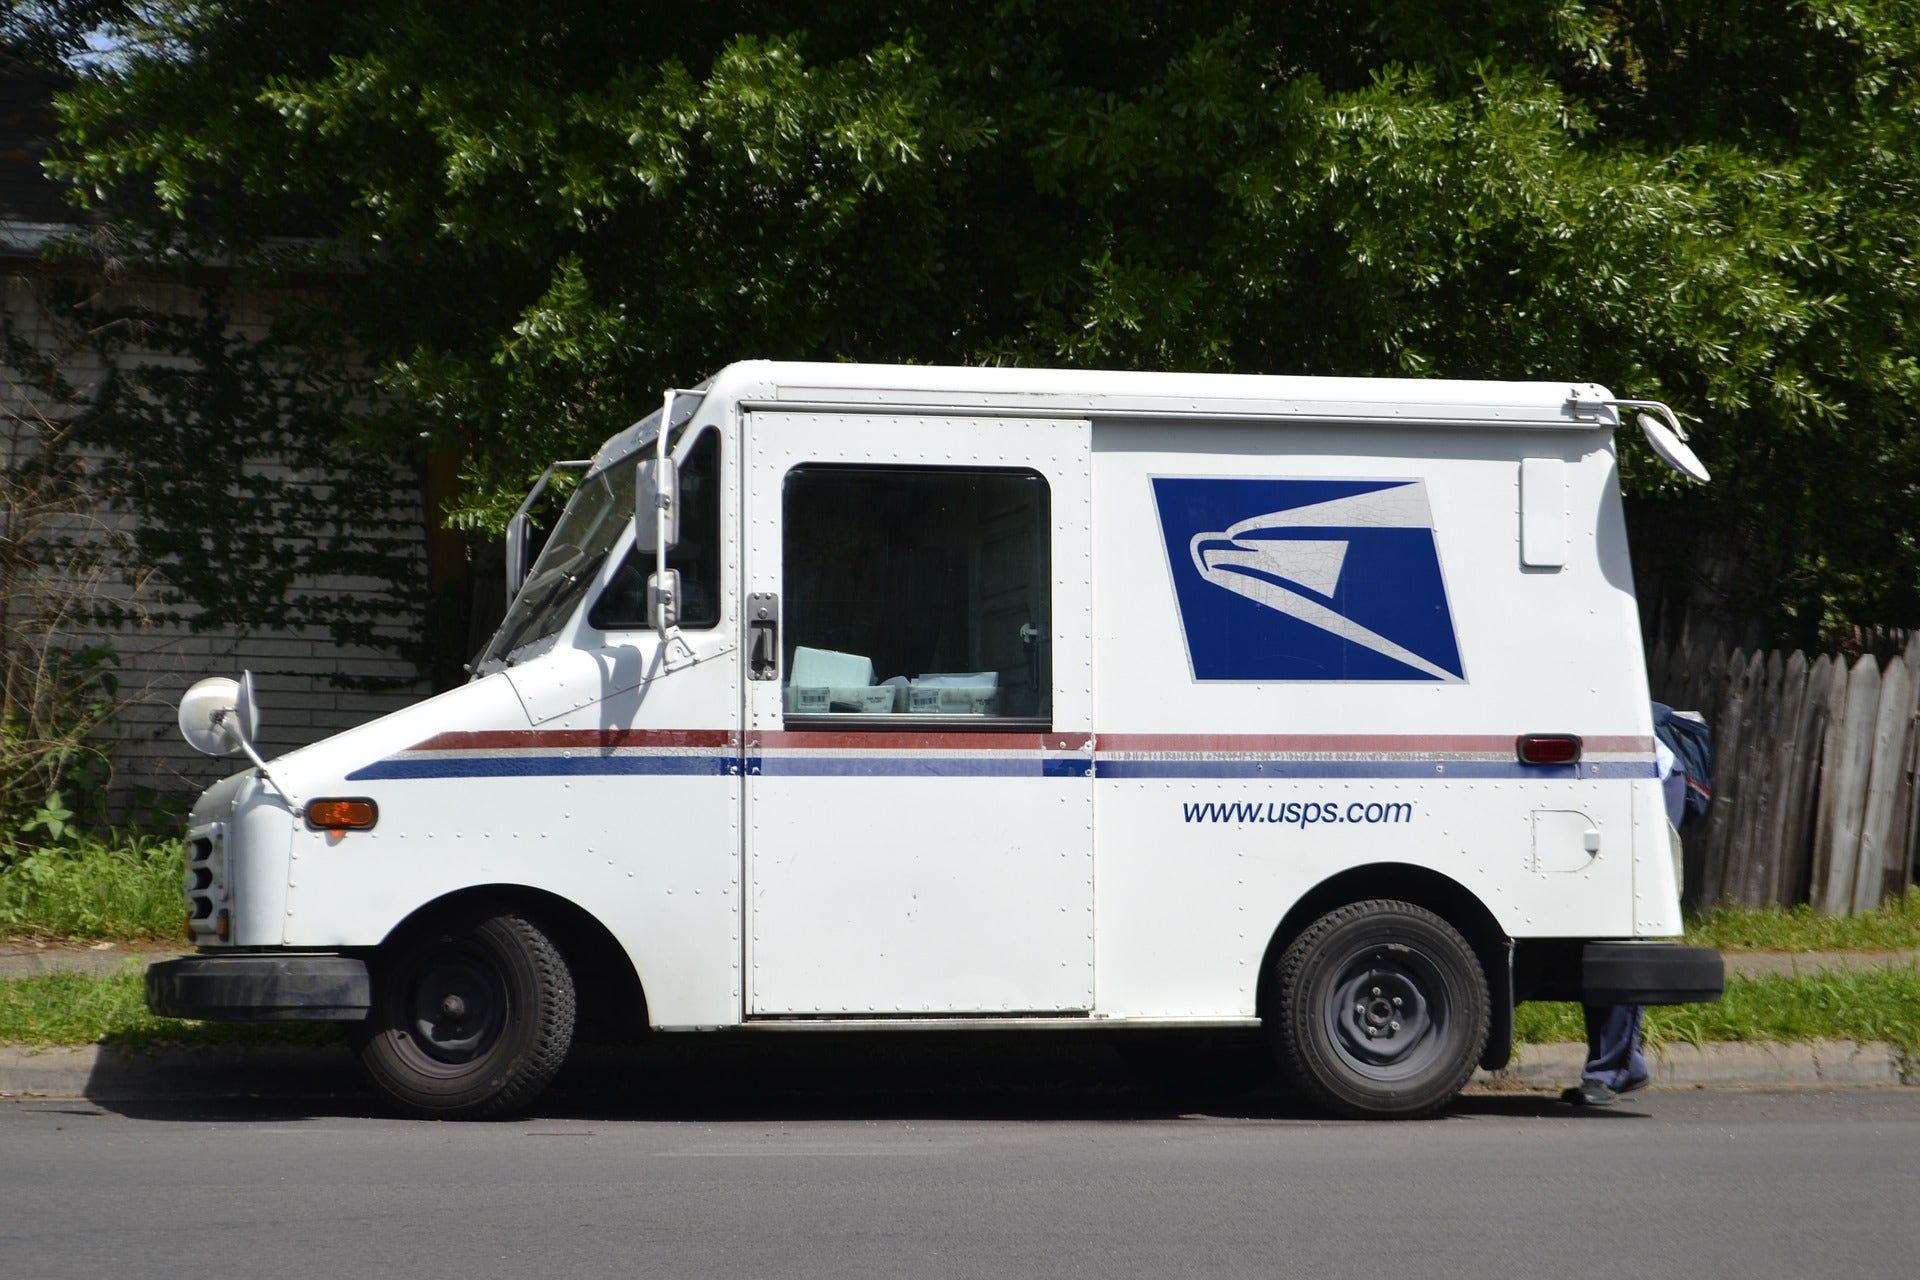 Proposal Floated To Allow USPS Self-Declaration Of Foreign Postal Shipments; Keep US In UPU